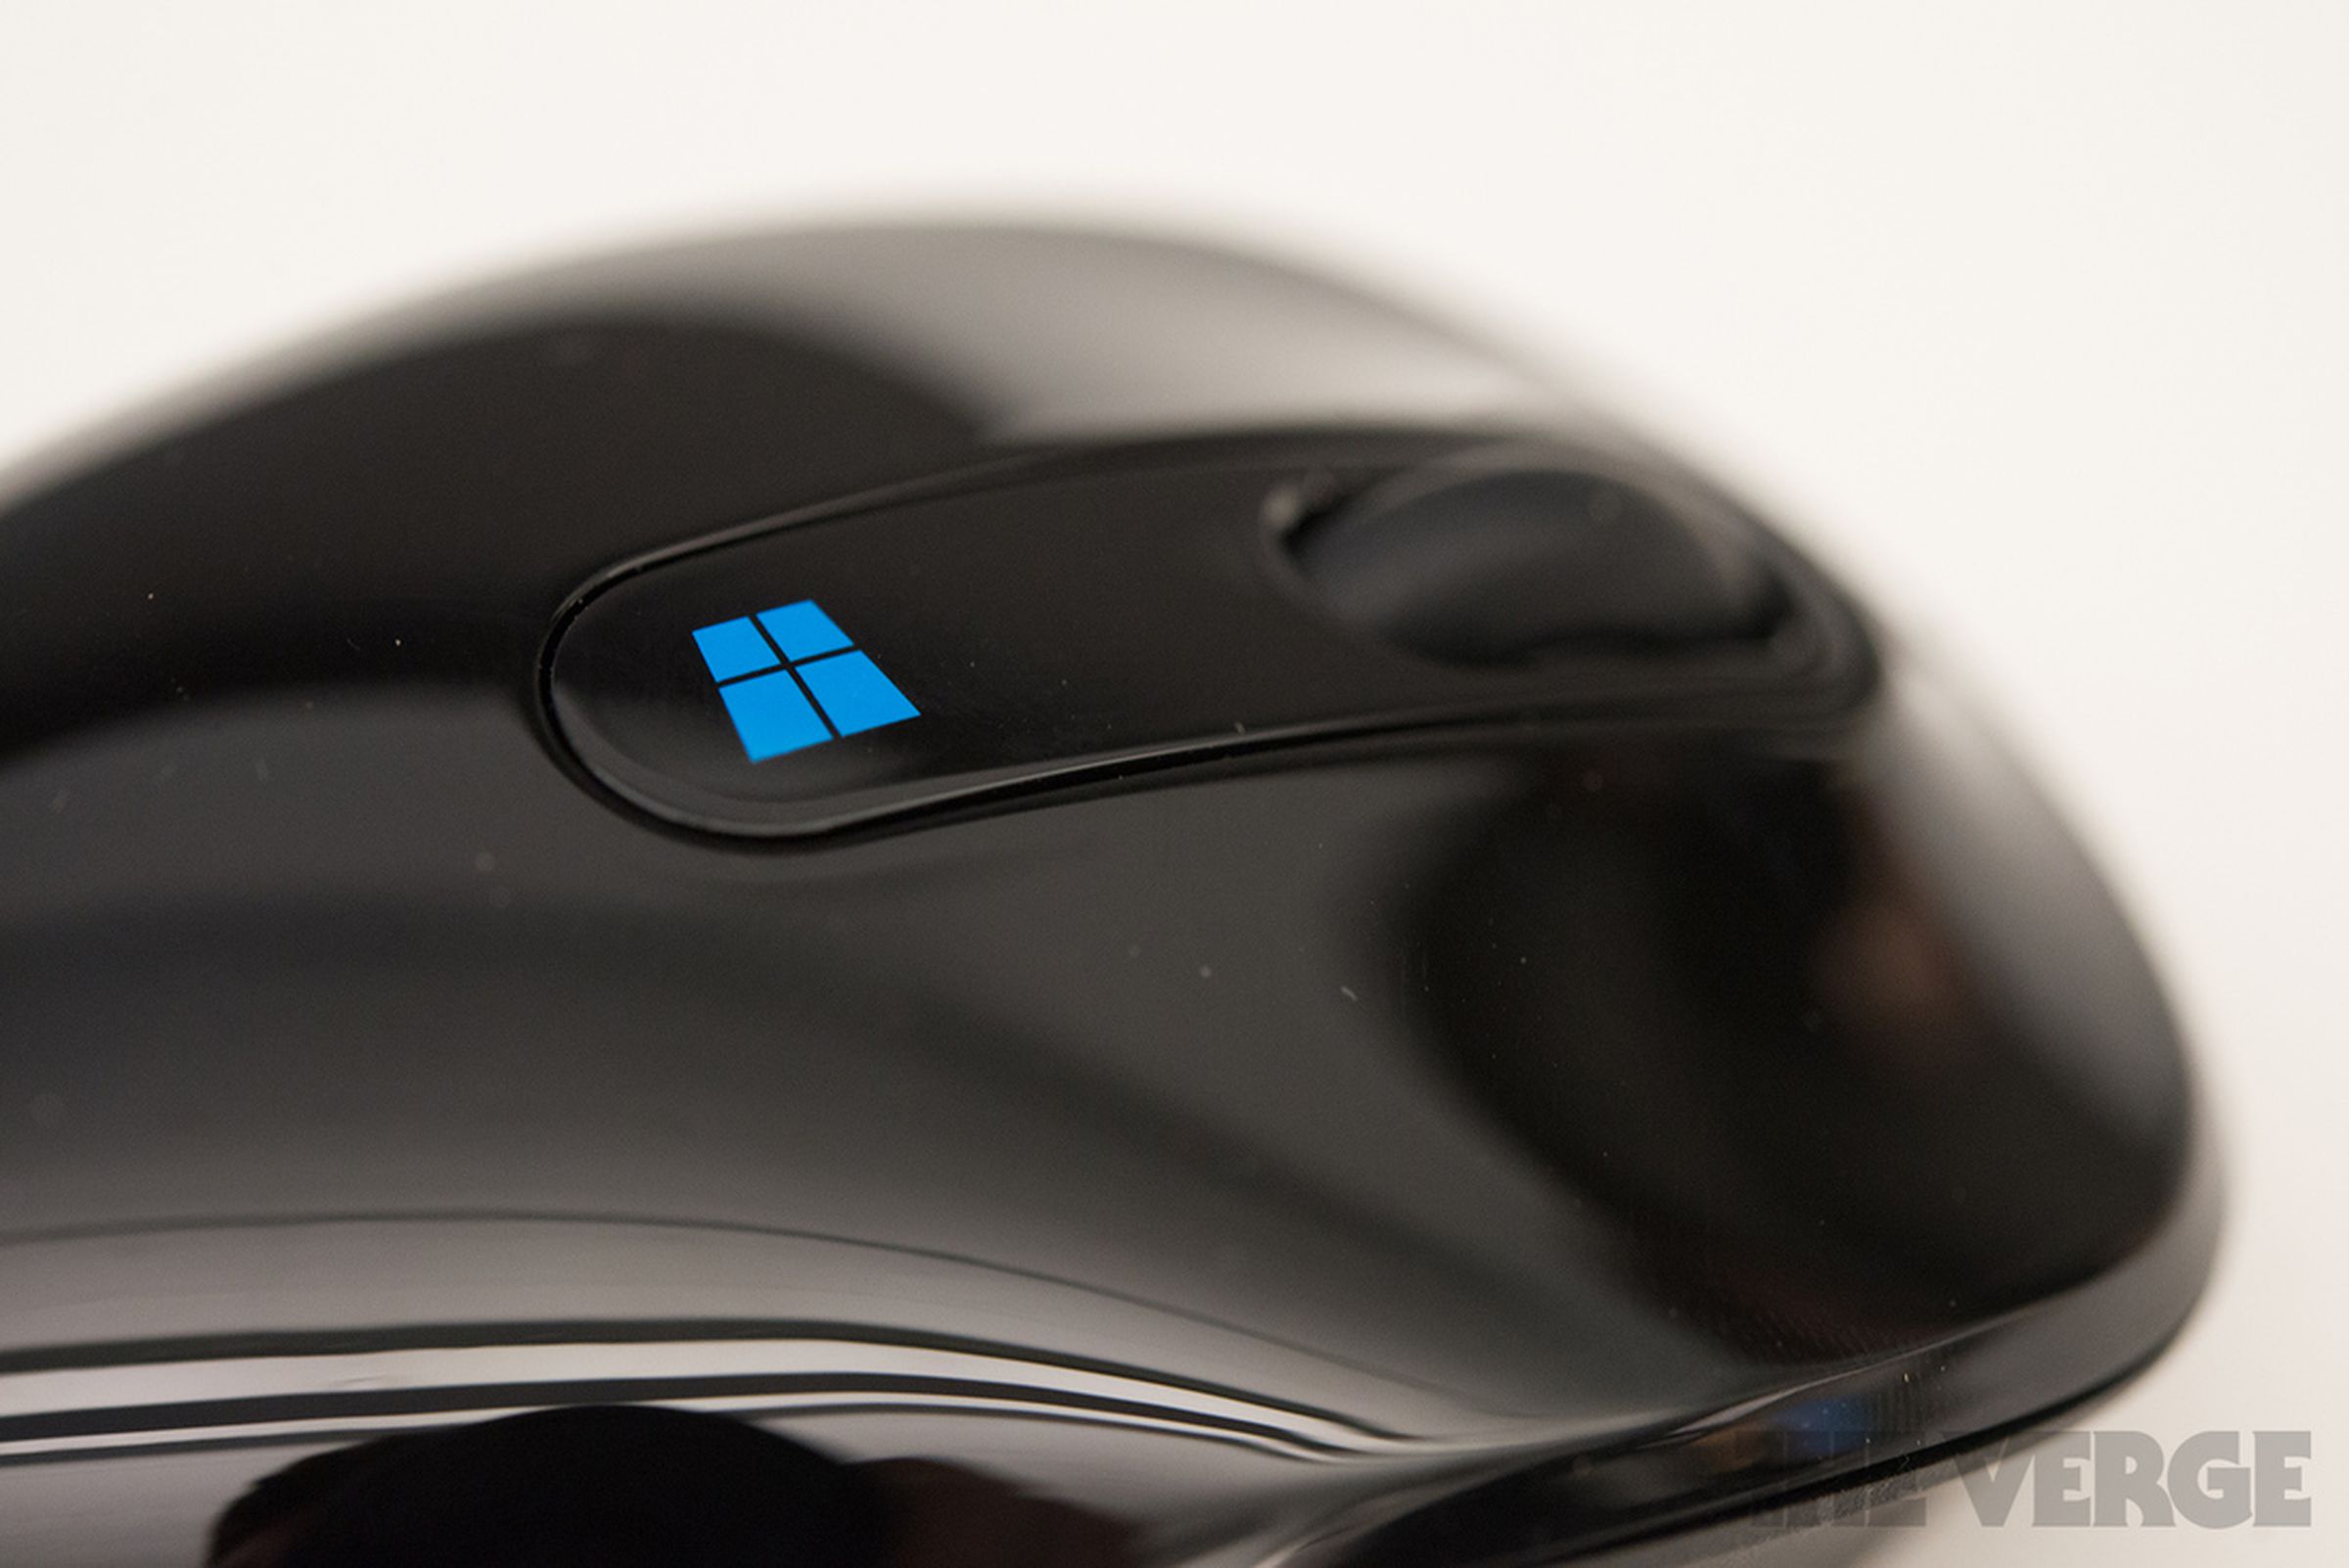 Microsoft Sculpt Comfort and Sculpt Mobile mice hands-on pictures